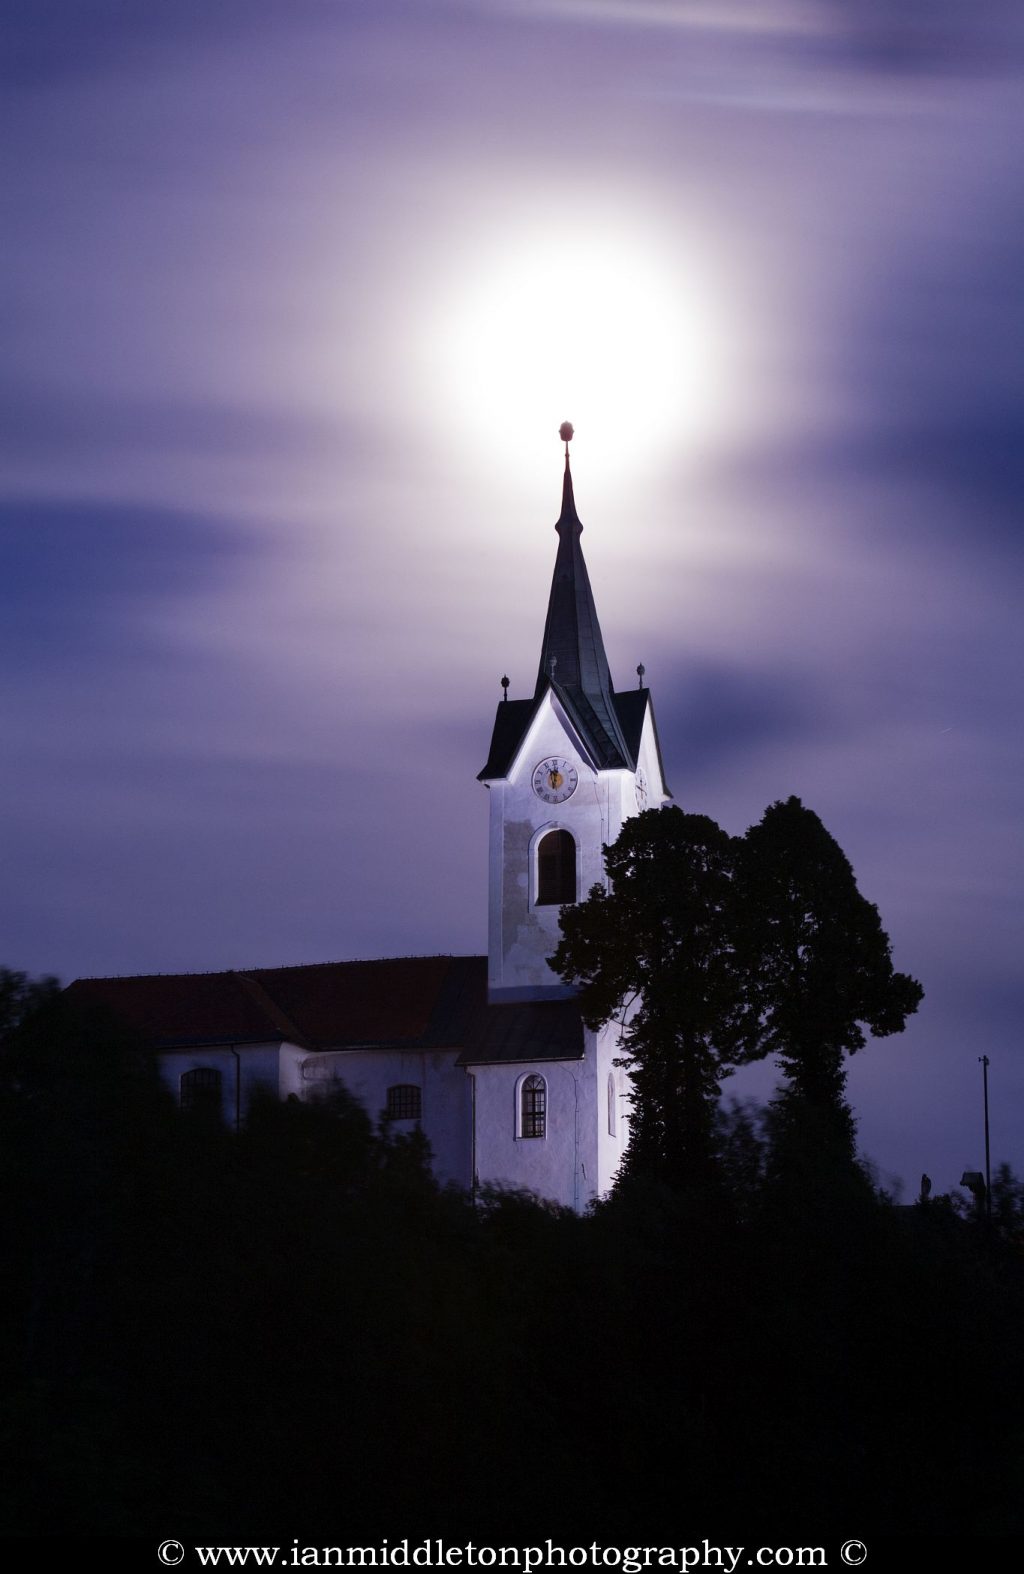 The 2013 supermoon rises over the spire of the church of Saint Marjeta (Sveta Marjeta) in Prezganje in the Jance hills to the east of Ljubljana, Slovenia. This was shot on the evening of June 22nd, the night before totality and the moon was approximately 98% full.